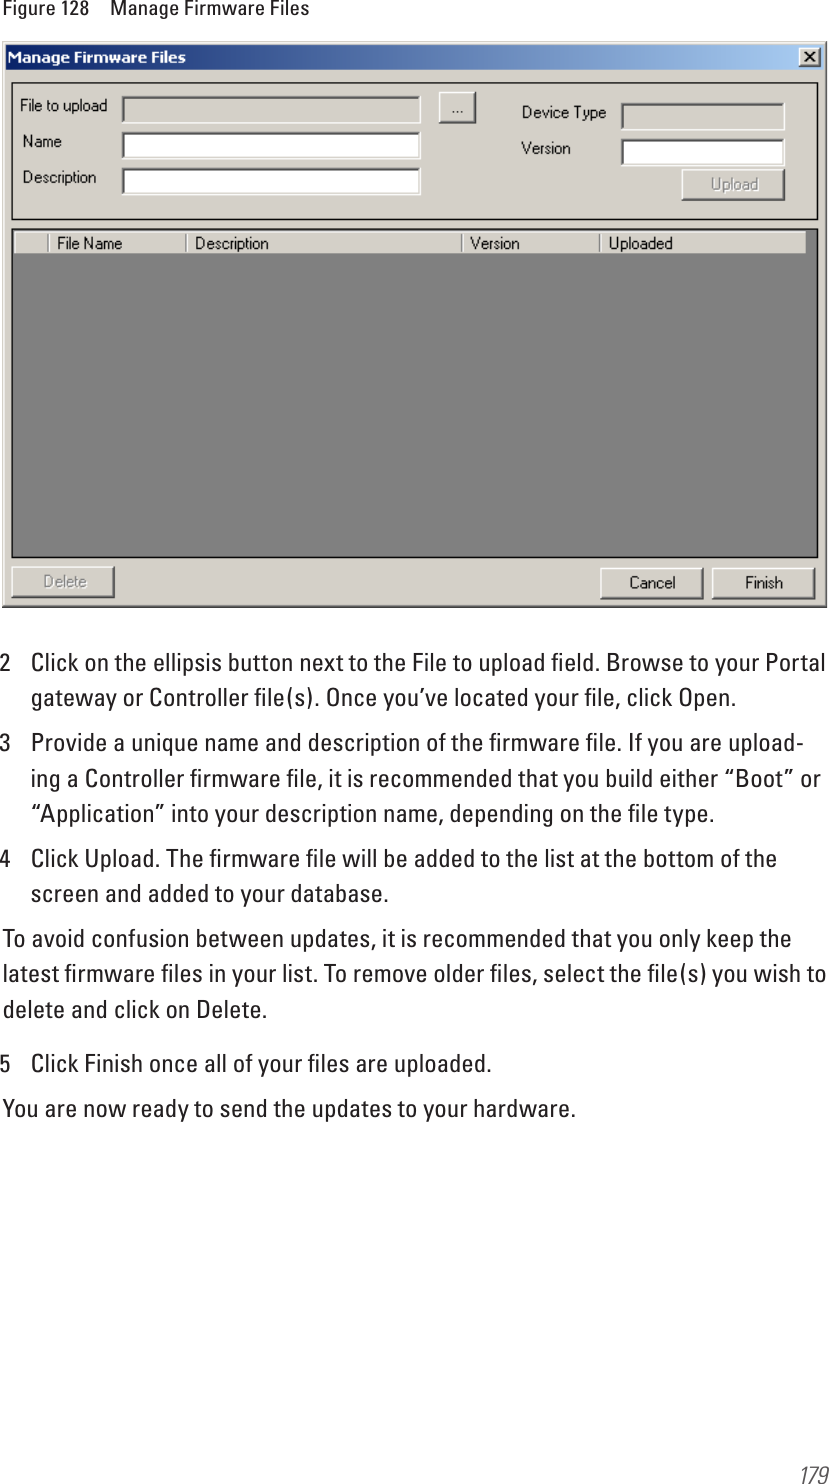 179Figure 128  Manage Firmware Files2  Click on the ellipsis button next to the File to upload ﬁeld. Browse to your Portal gateway or Controller ﬁle(s). Once you’ve located your ﬁle, click Open.3  Provide a unique name and description of the ﬁrmware ﬁle. If you are upload-ing a Controller ﬁrmware ﬁle, it is recommended that you build either “Boot” or “Application” into your description name, depending on the ﬁle type.4  Click Upload. The ﬁrmware ﬁle will be added to the list at the bottom of the screen and added to your database.To avoid confusion between updates, it is recommended that you only keep the latest ﬁrmware ﬁles in your list. To remove older ﬁles, select the ﬁle(s) you wish to delete and click on Delete.5  Click Finish once all of your ﬁles are uploaded.You are now ready to send the updates to your hardware.